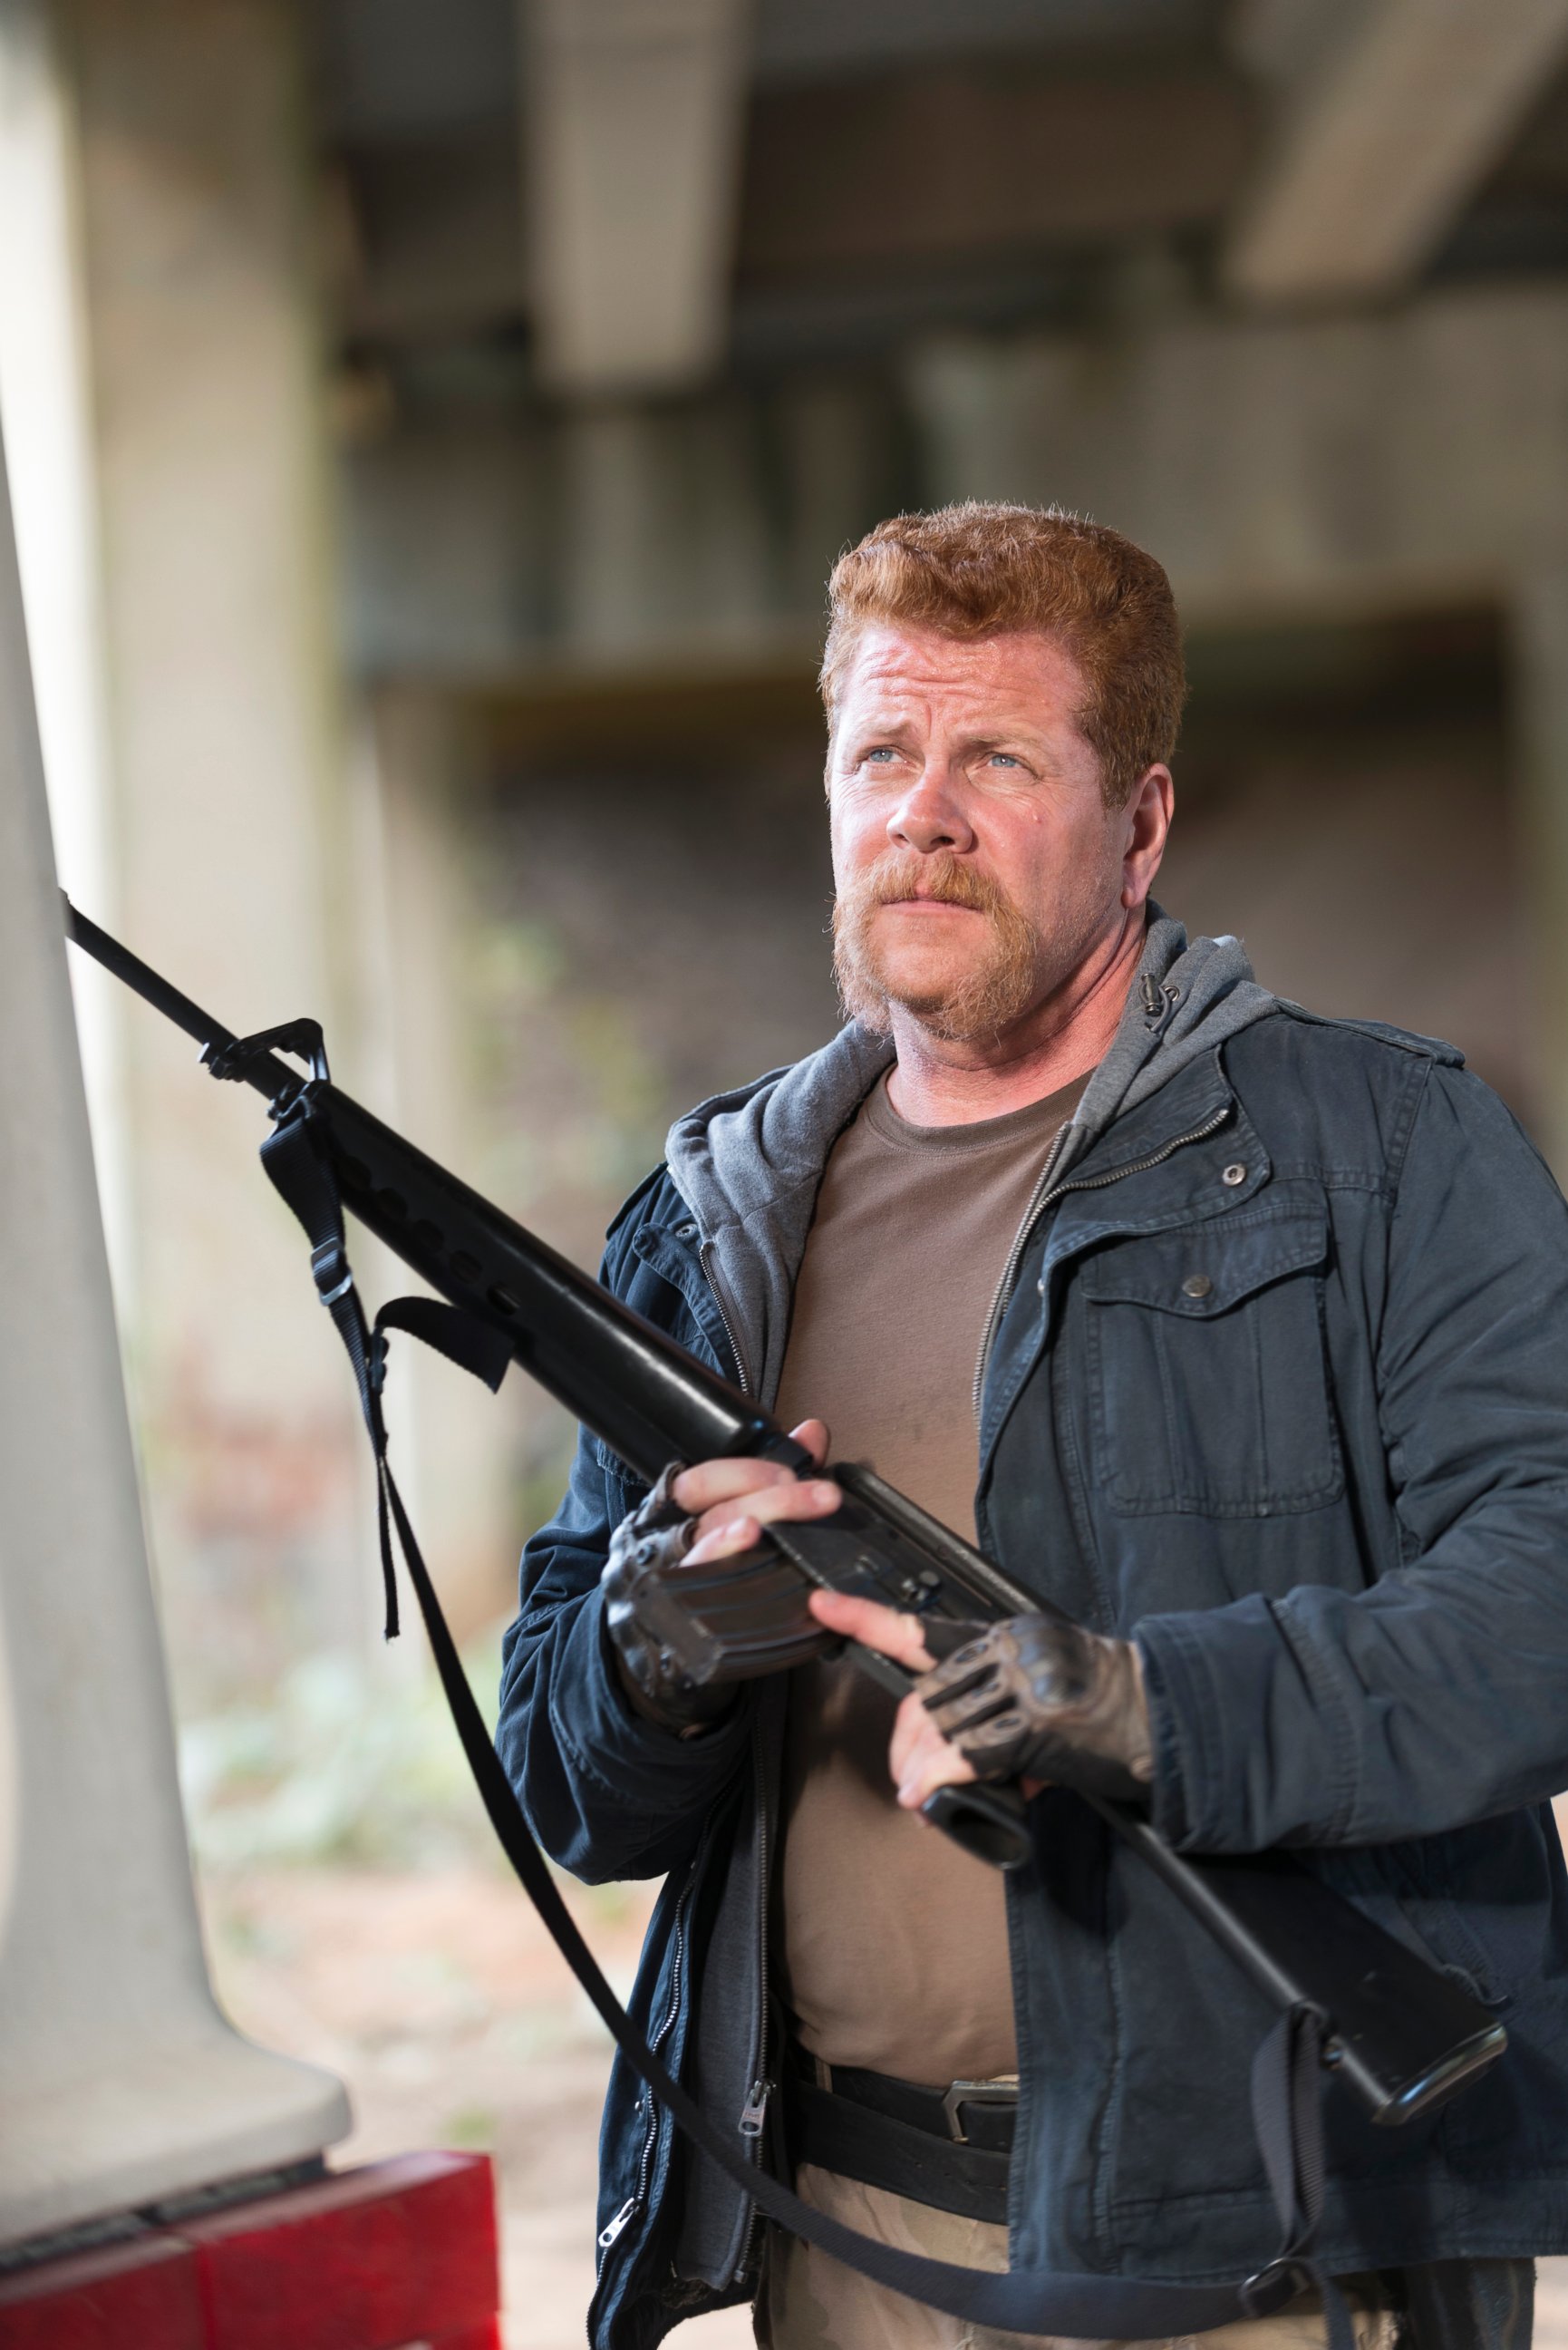 PHOTO: Michael Cudllitz as Sgt Abraham Ford in "The Walking Dead."